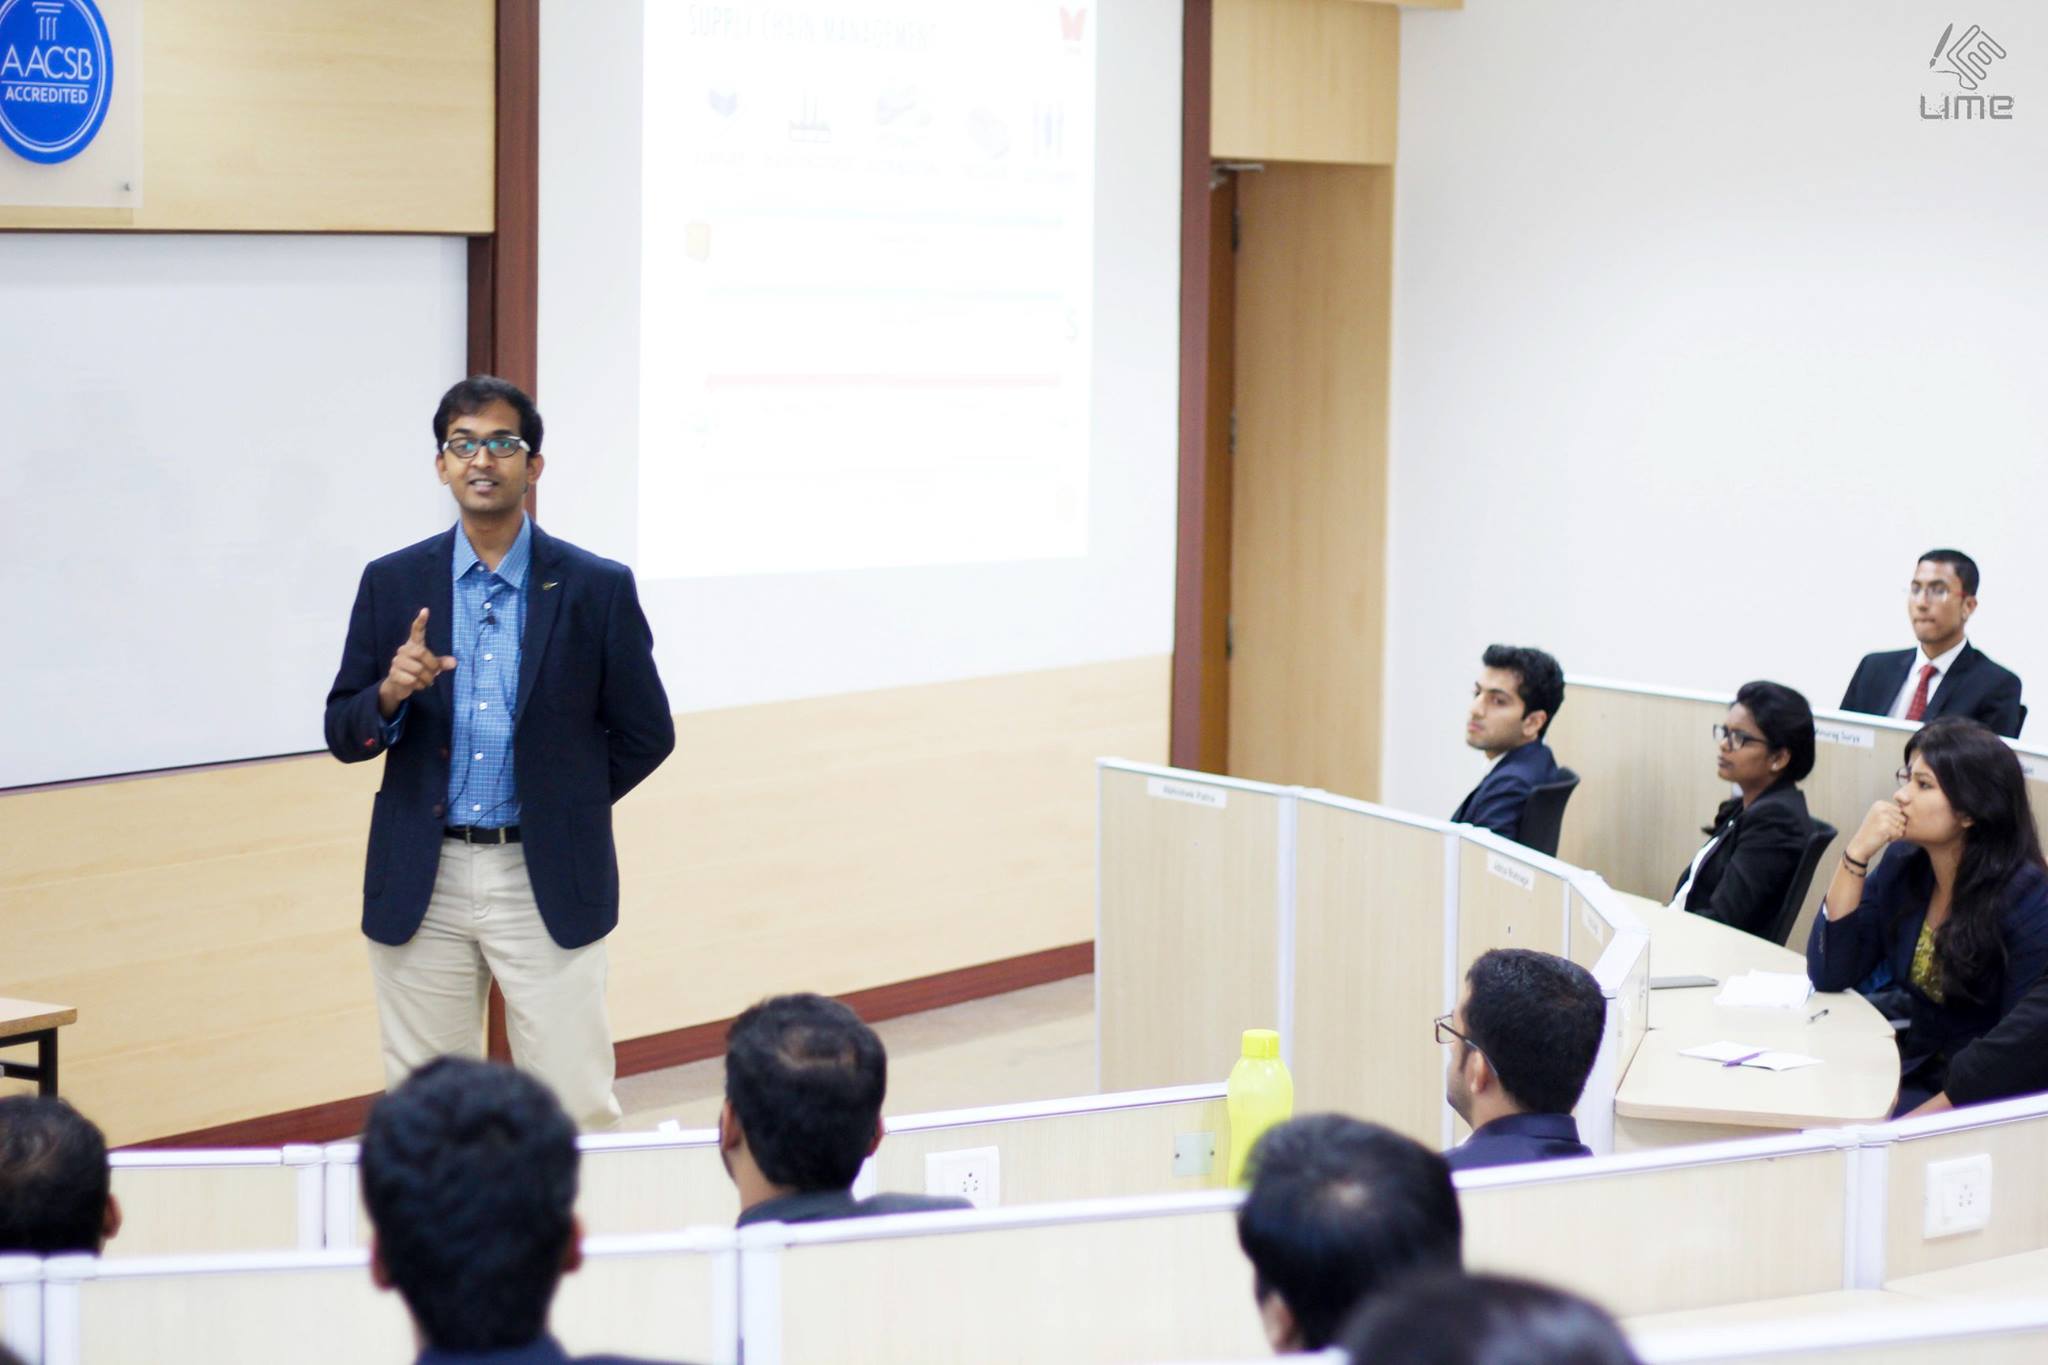 TAPMI Manipal – Guest Lecture on SCM and Industry Insights